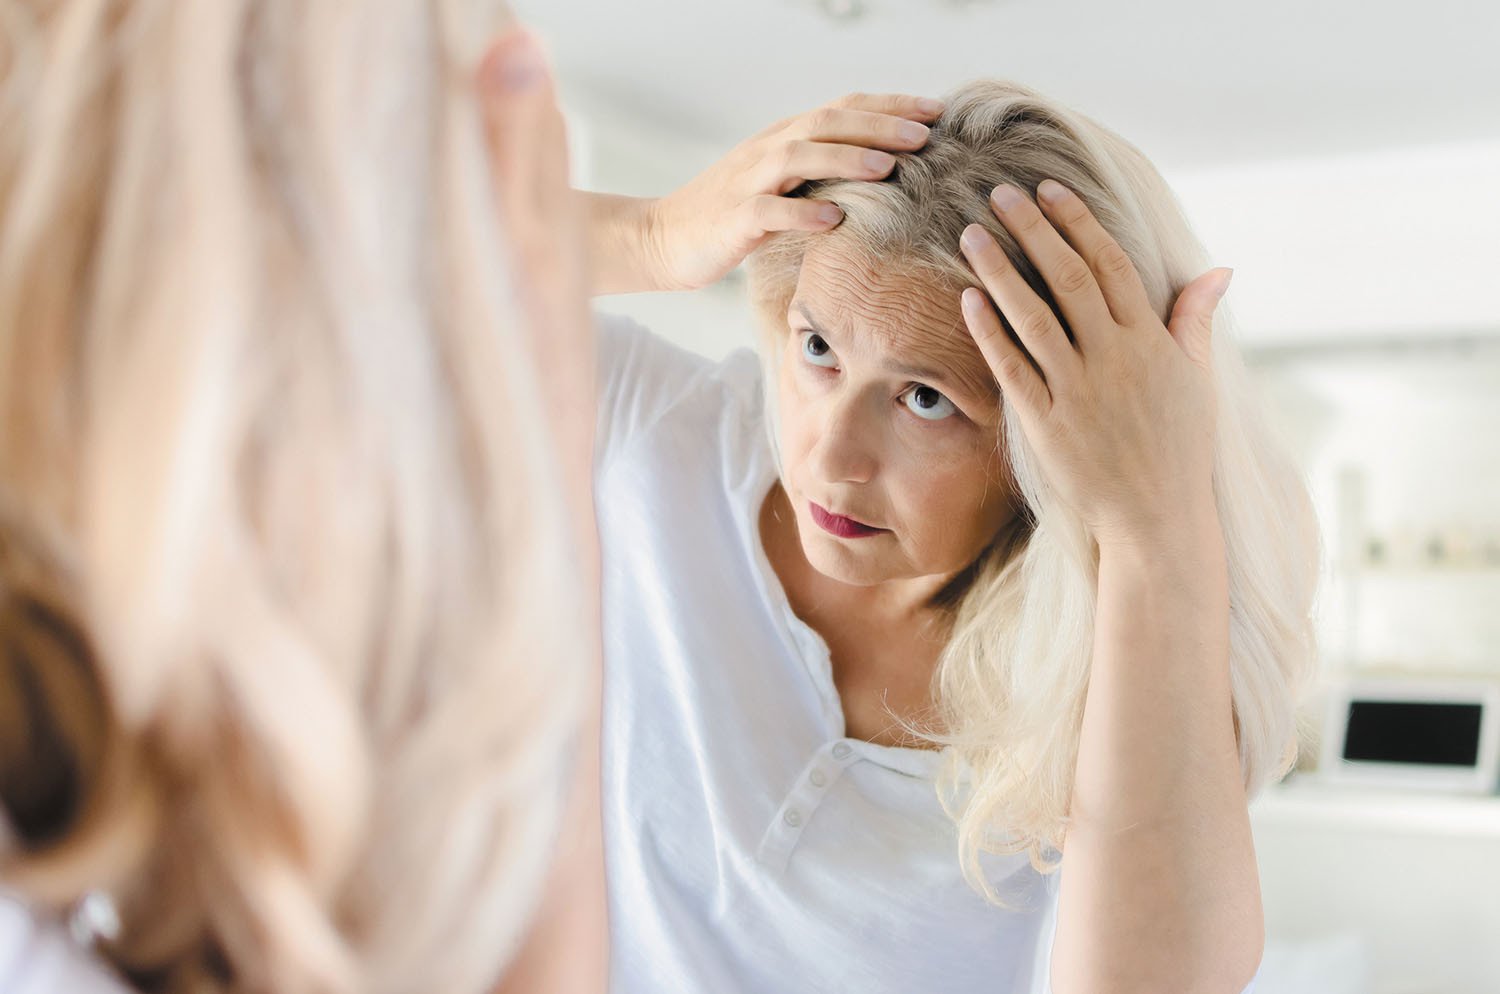 Hair thinning? Get to the root of the problem